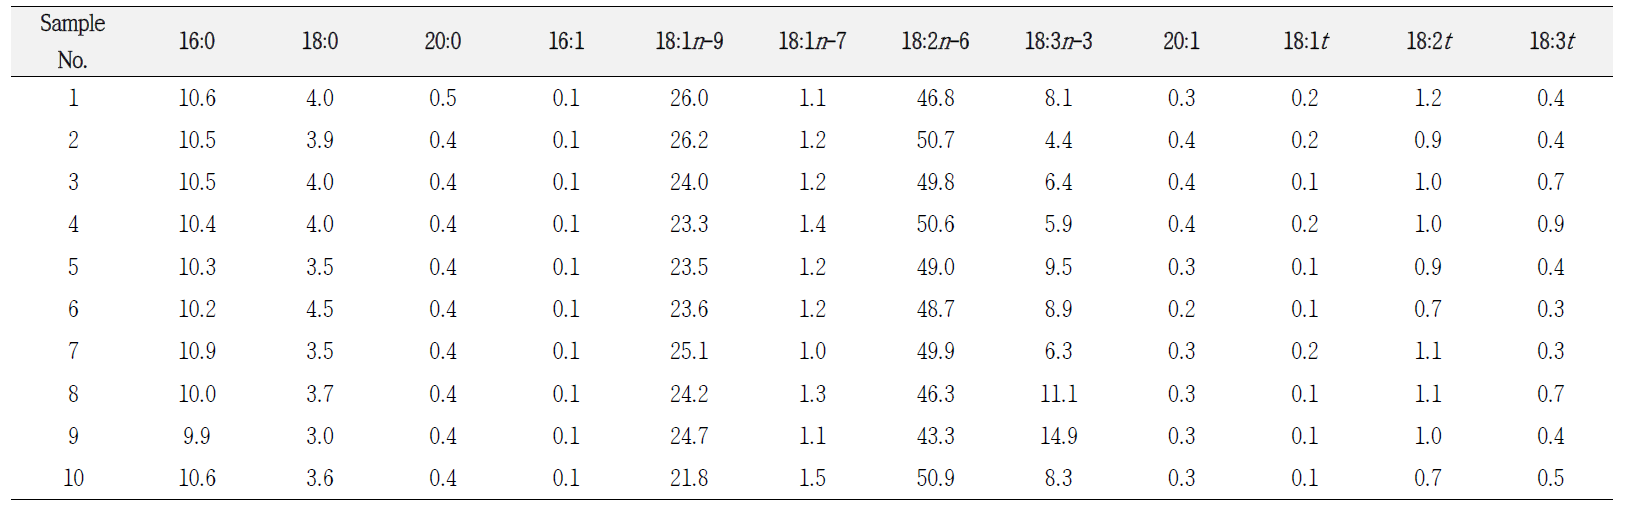 Content values(w/w %) of fatty acids in the adulterated perilla oil samples